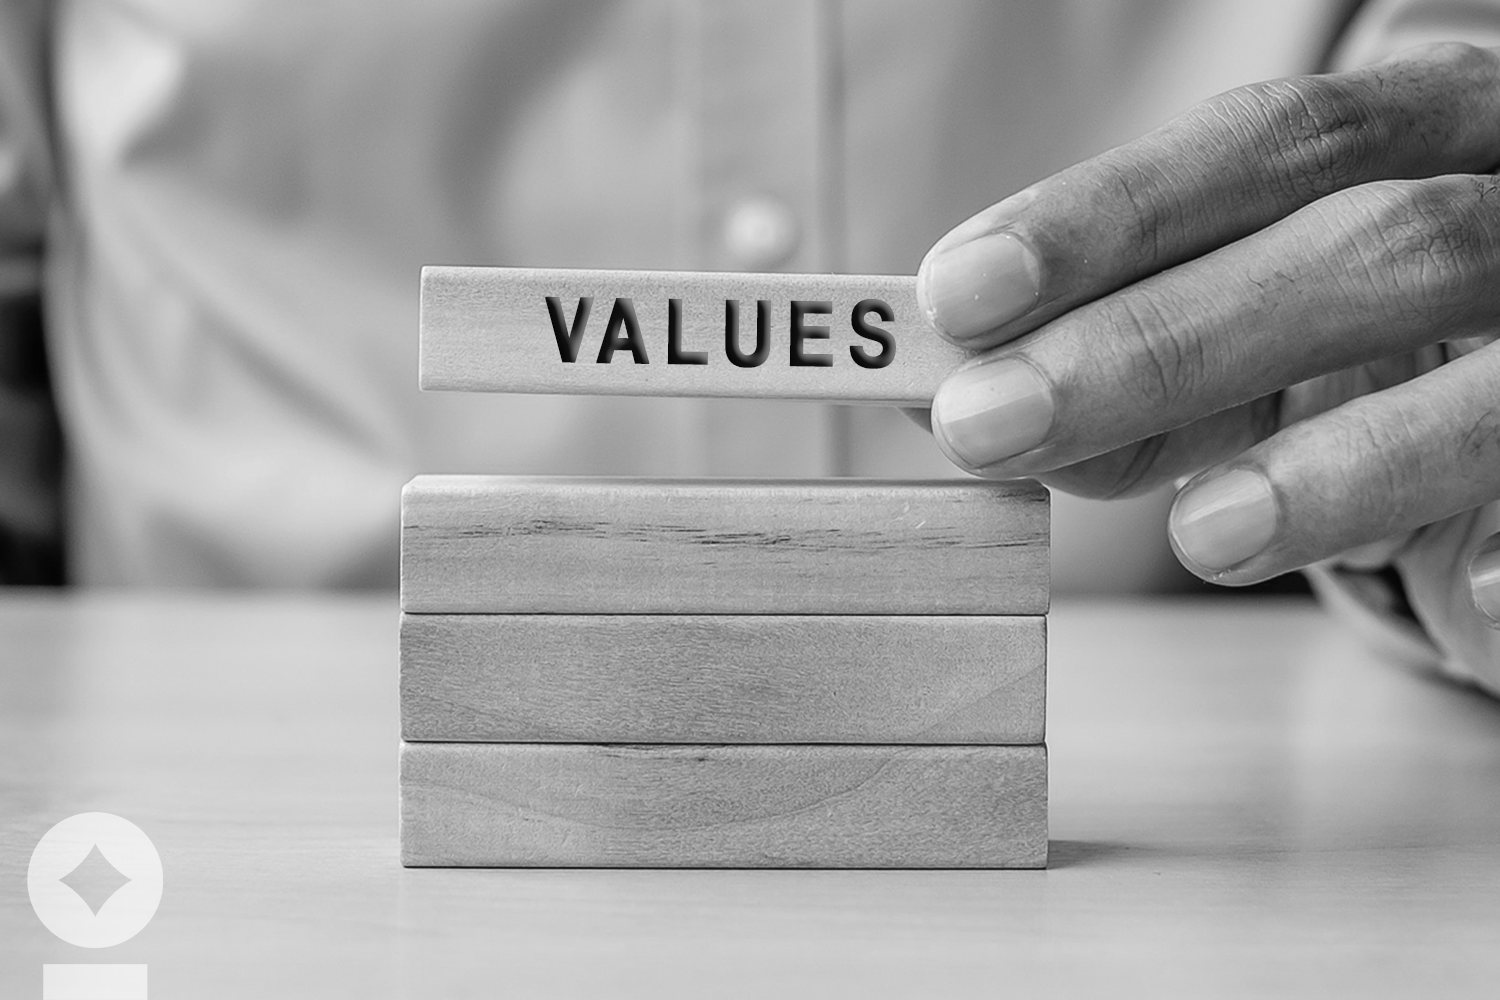 Valuing Your Values, a White Paper from NewEdge Wealth